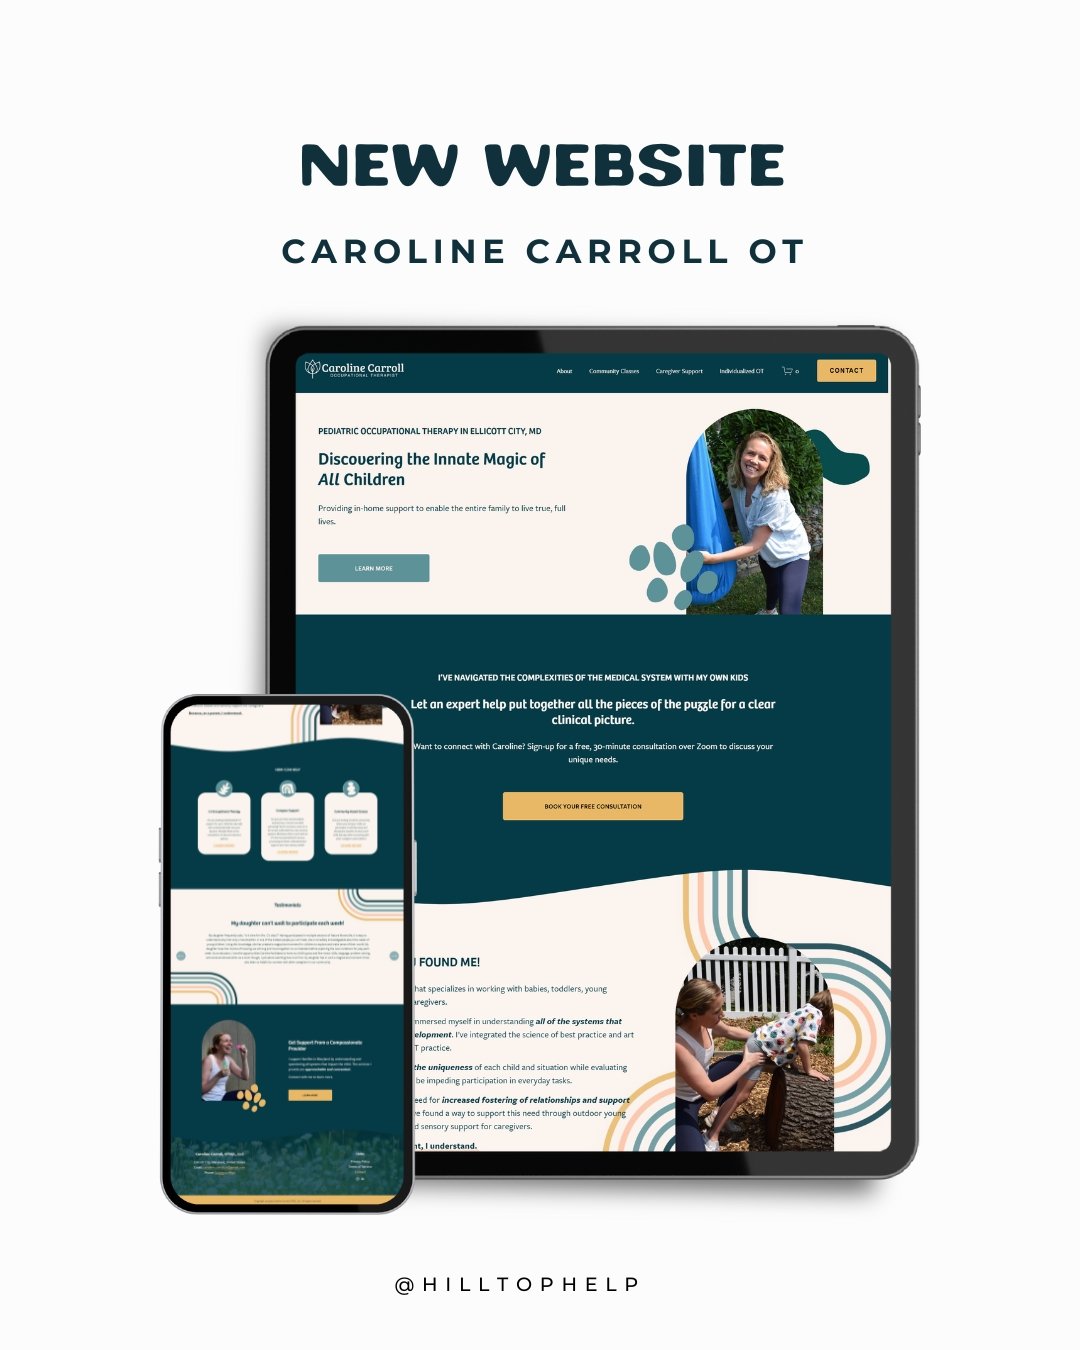 As an OT providing treatment and services only in the Columbia, MD area, Caroline Carroll wanted her website to have a strong local SEO presence. 

🌿🌈We gave her that and a playful, mid-century modern style Squarespace website with bold colors! 🌿?